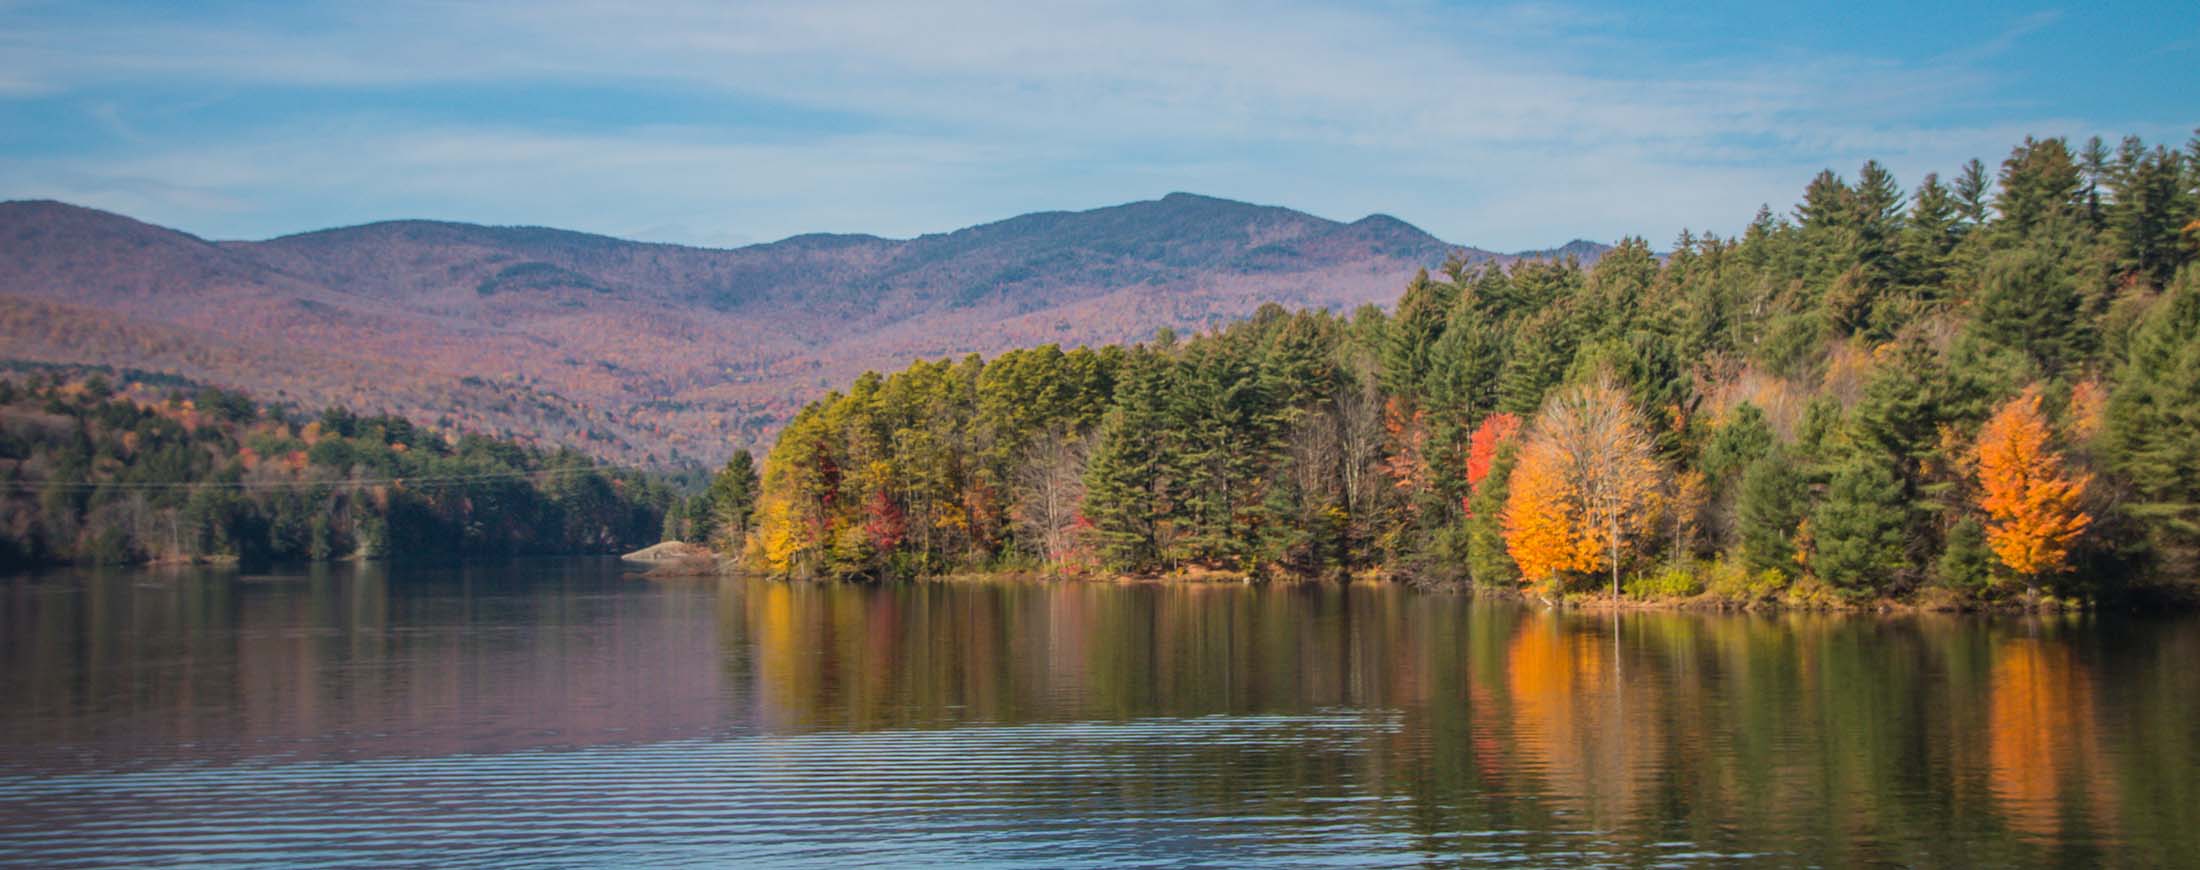 A view of a lake surrounded by mountains and trees that are turning red, orange and yellow in the fall. ge an 